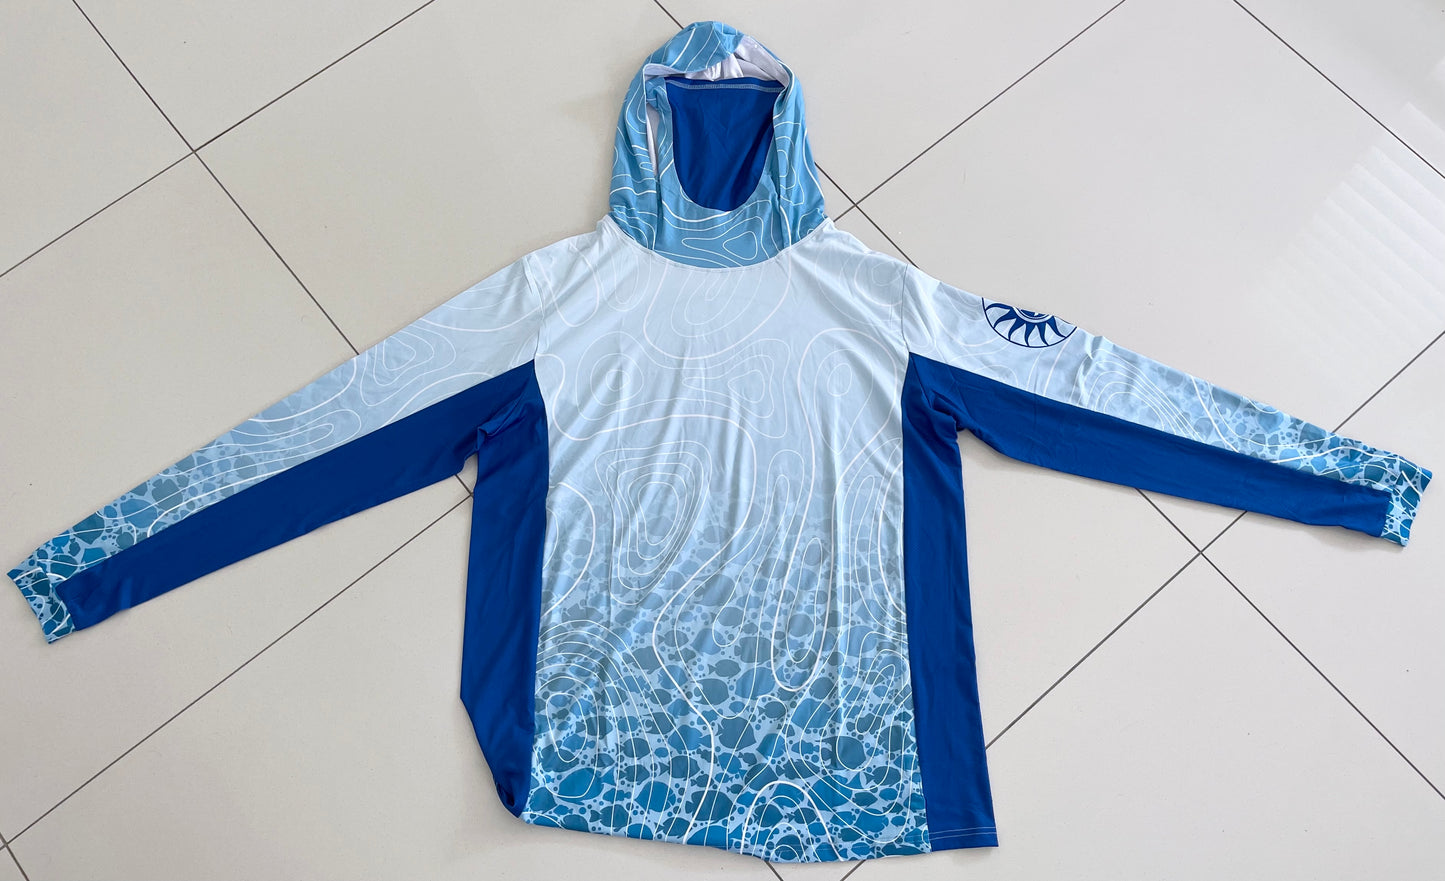 Jetfisher Sublimate shirt with Face and Neck Protection